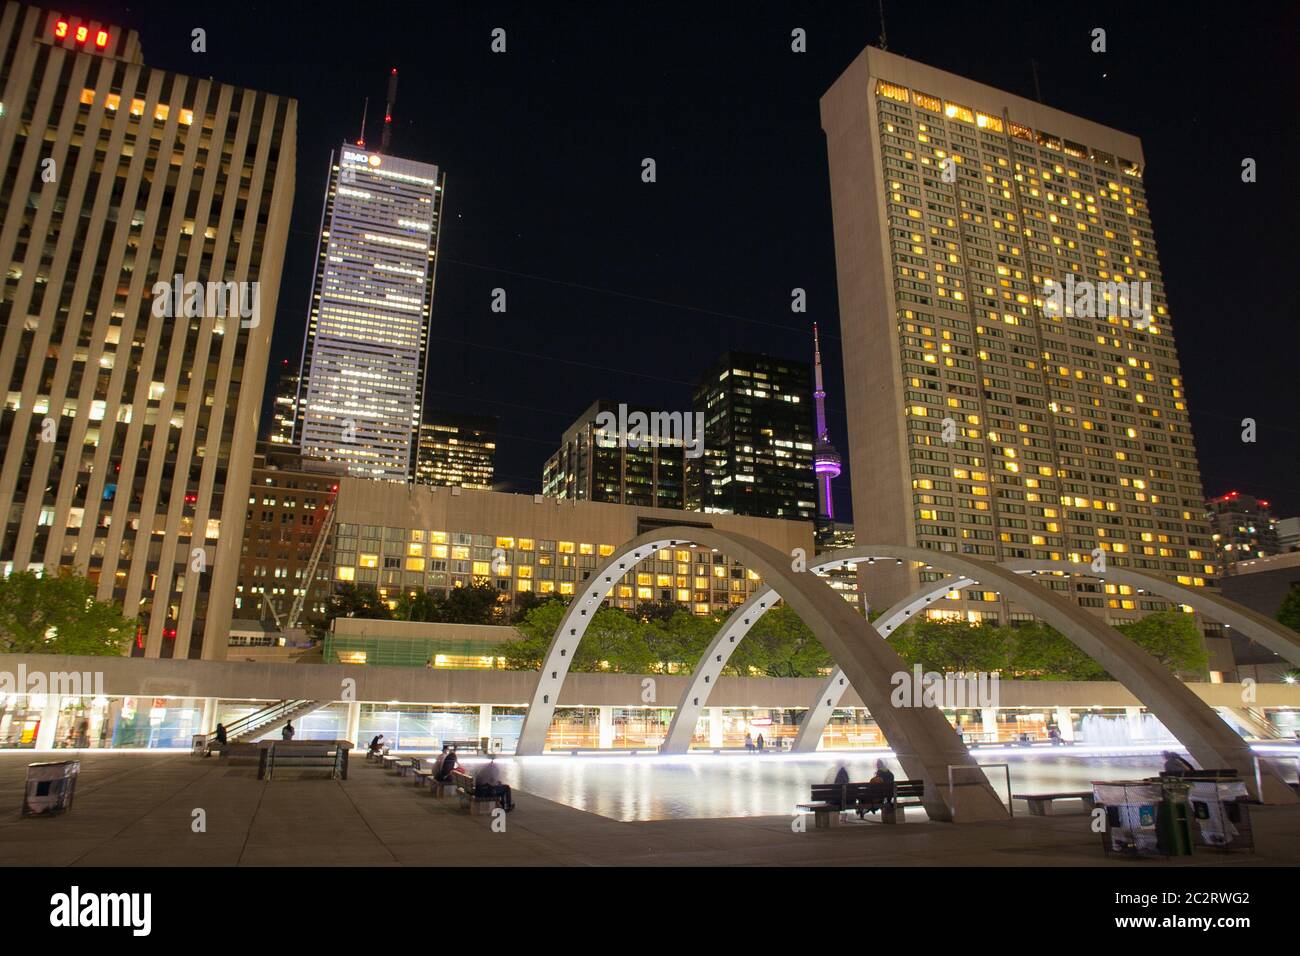 Night view of the fountain in front of the new City Hall in Toronto, Ontario, Canada Stock Photo